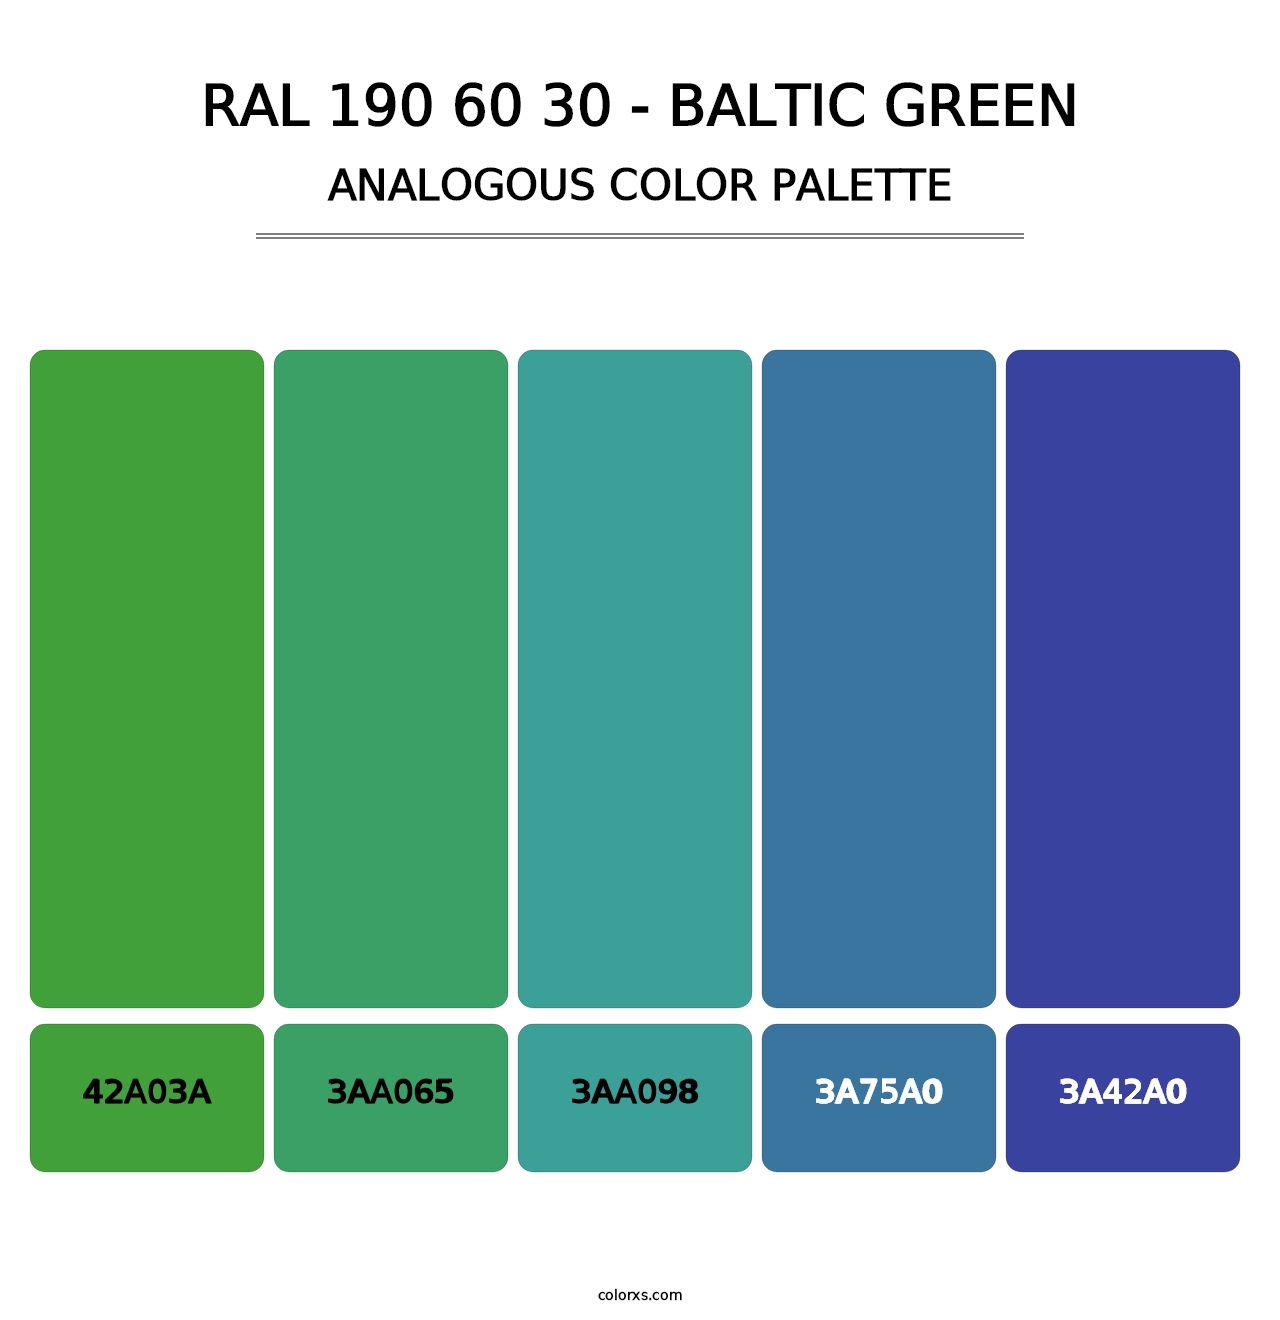 RAL 190 60 30 - Baltic Green - Analogous Color Palette